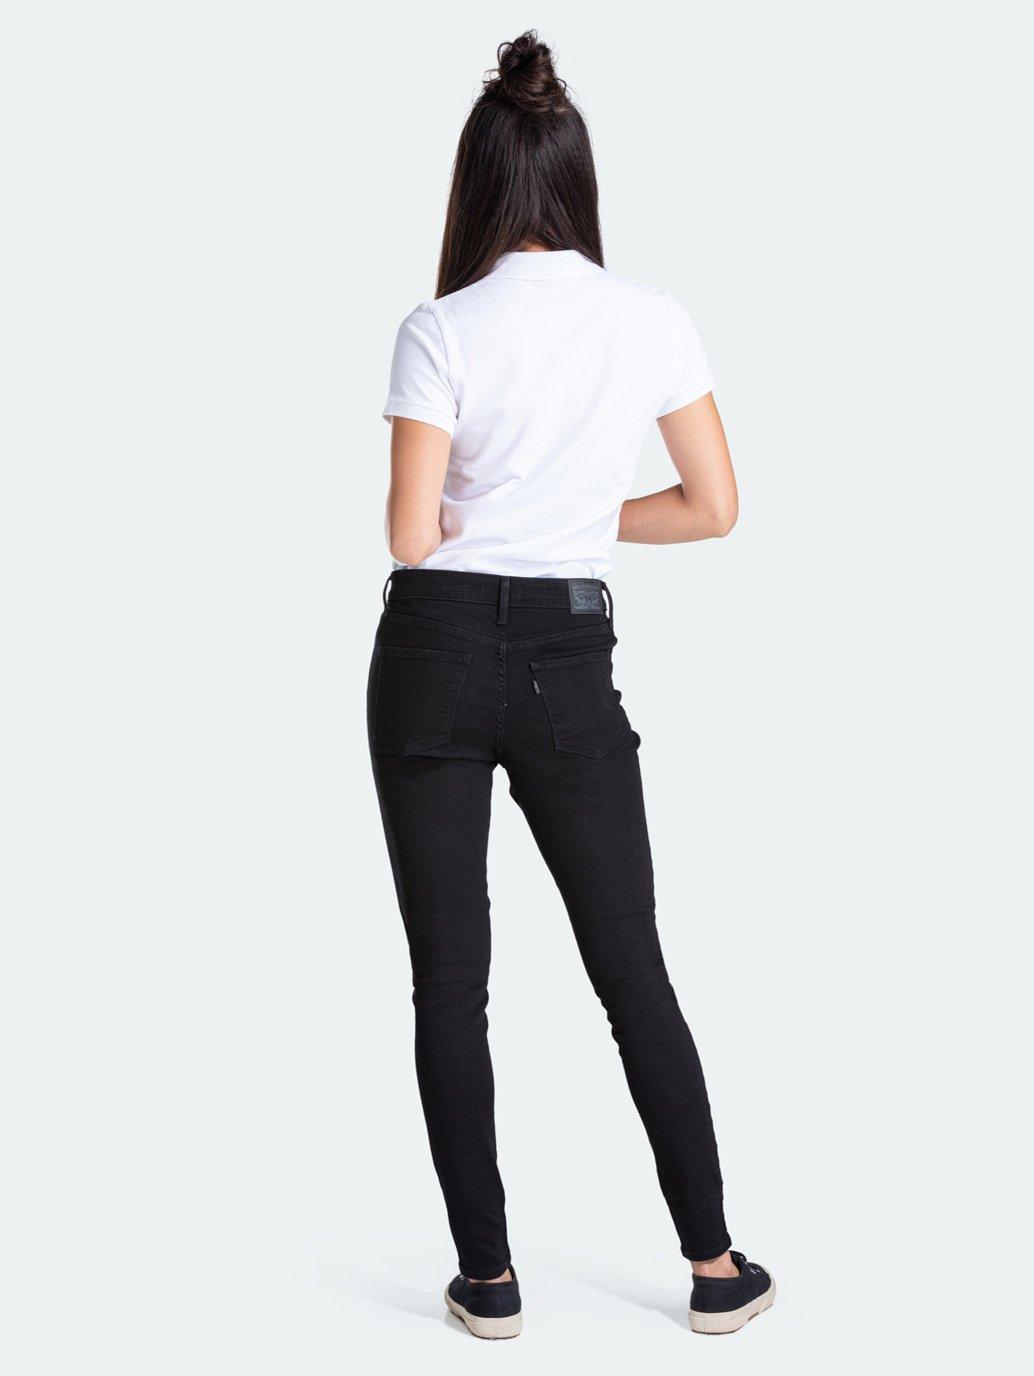 levis malaysia womens 310 shaping super skinny jeans 560410064 02 Back